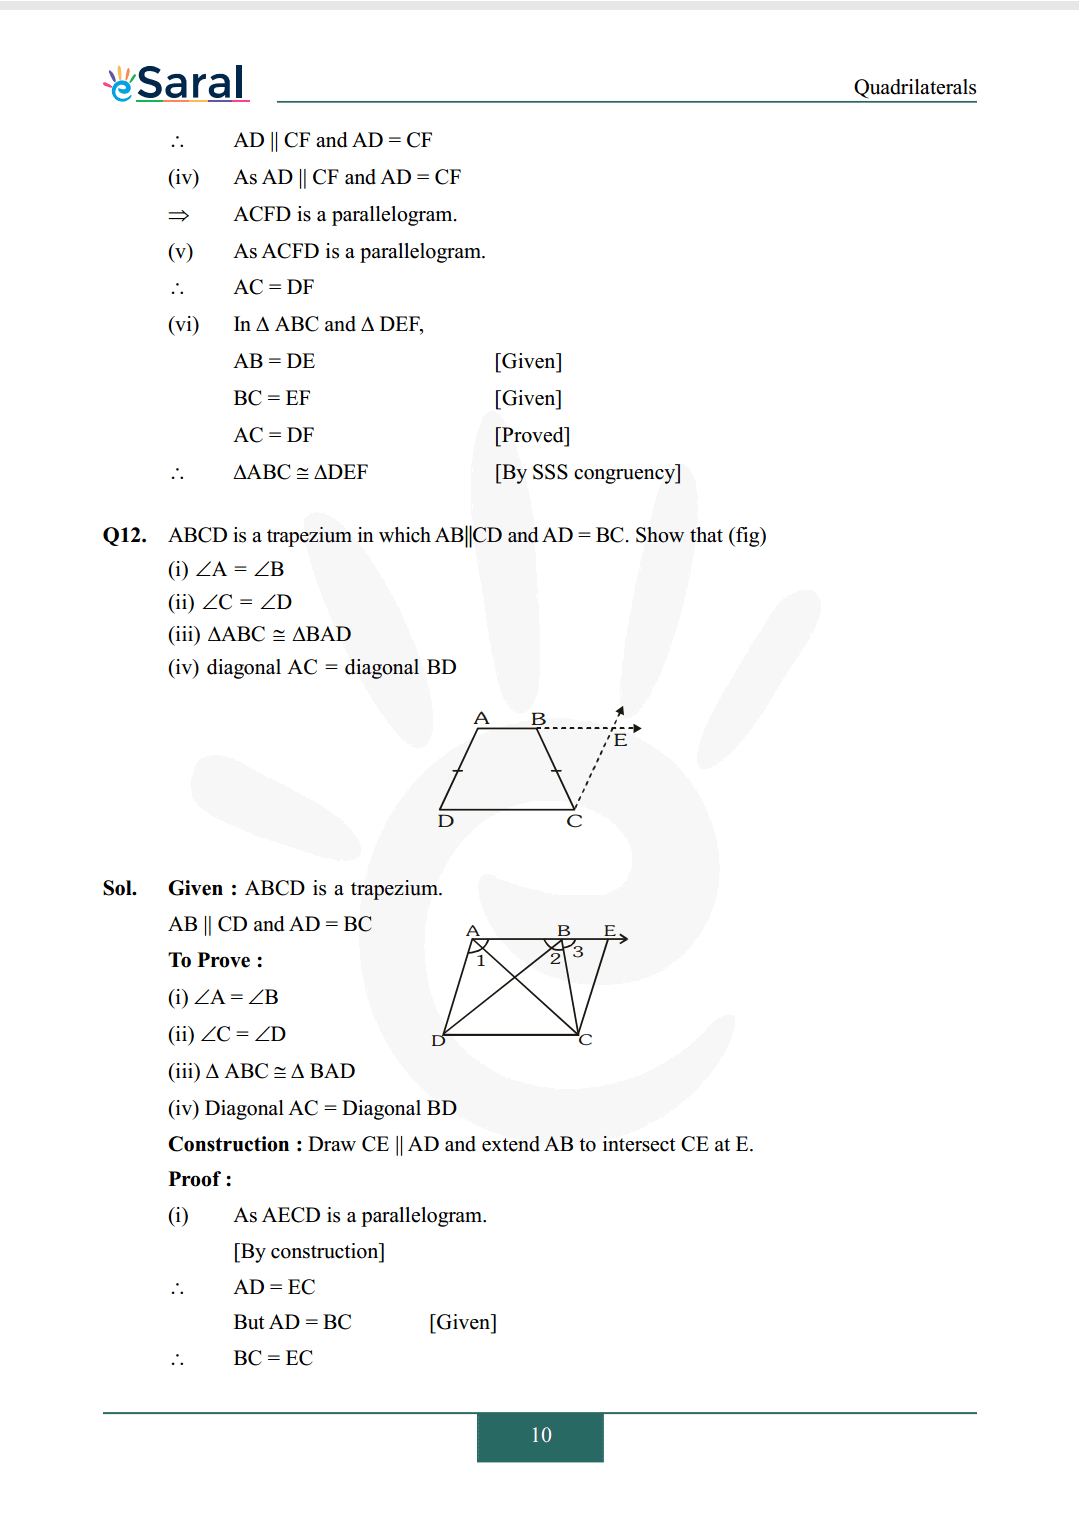 Class 9 maths chapter 8 exercise 8.1 solutions Image 10